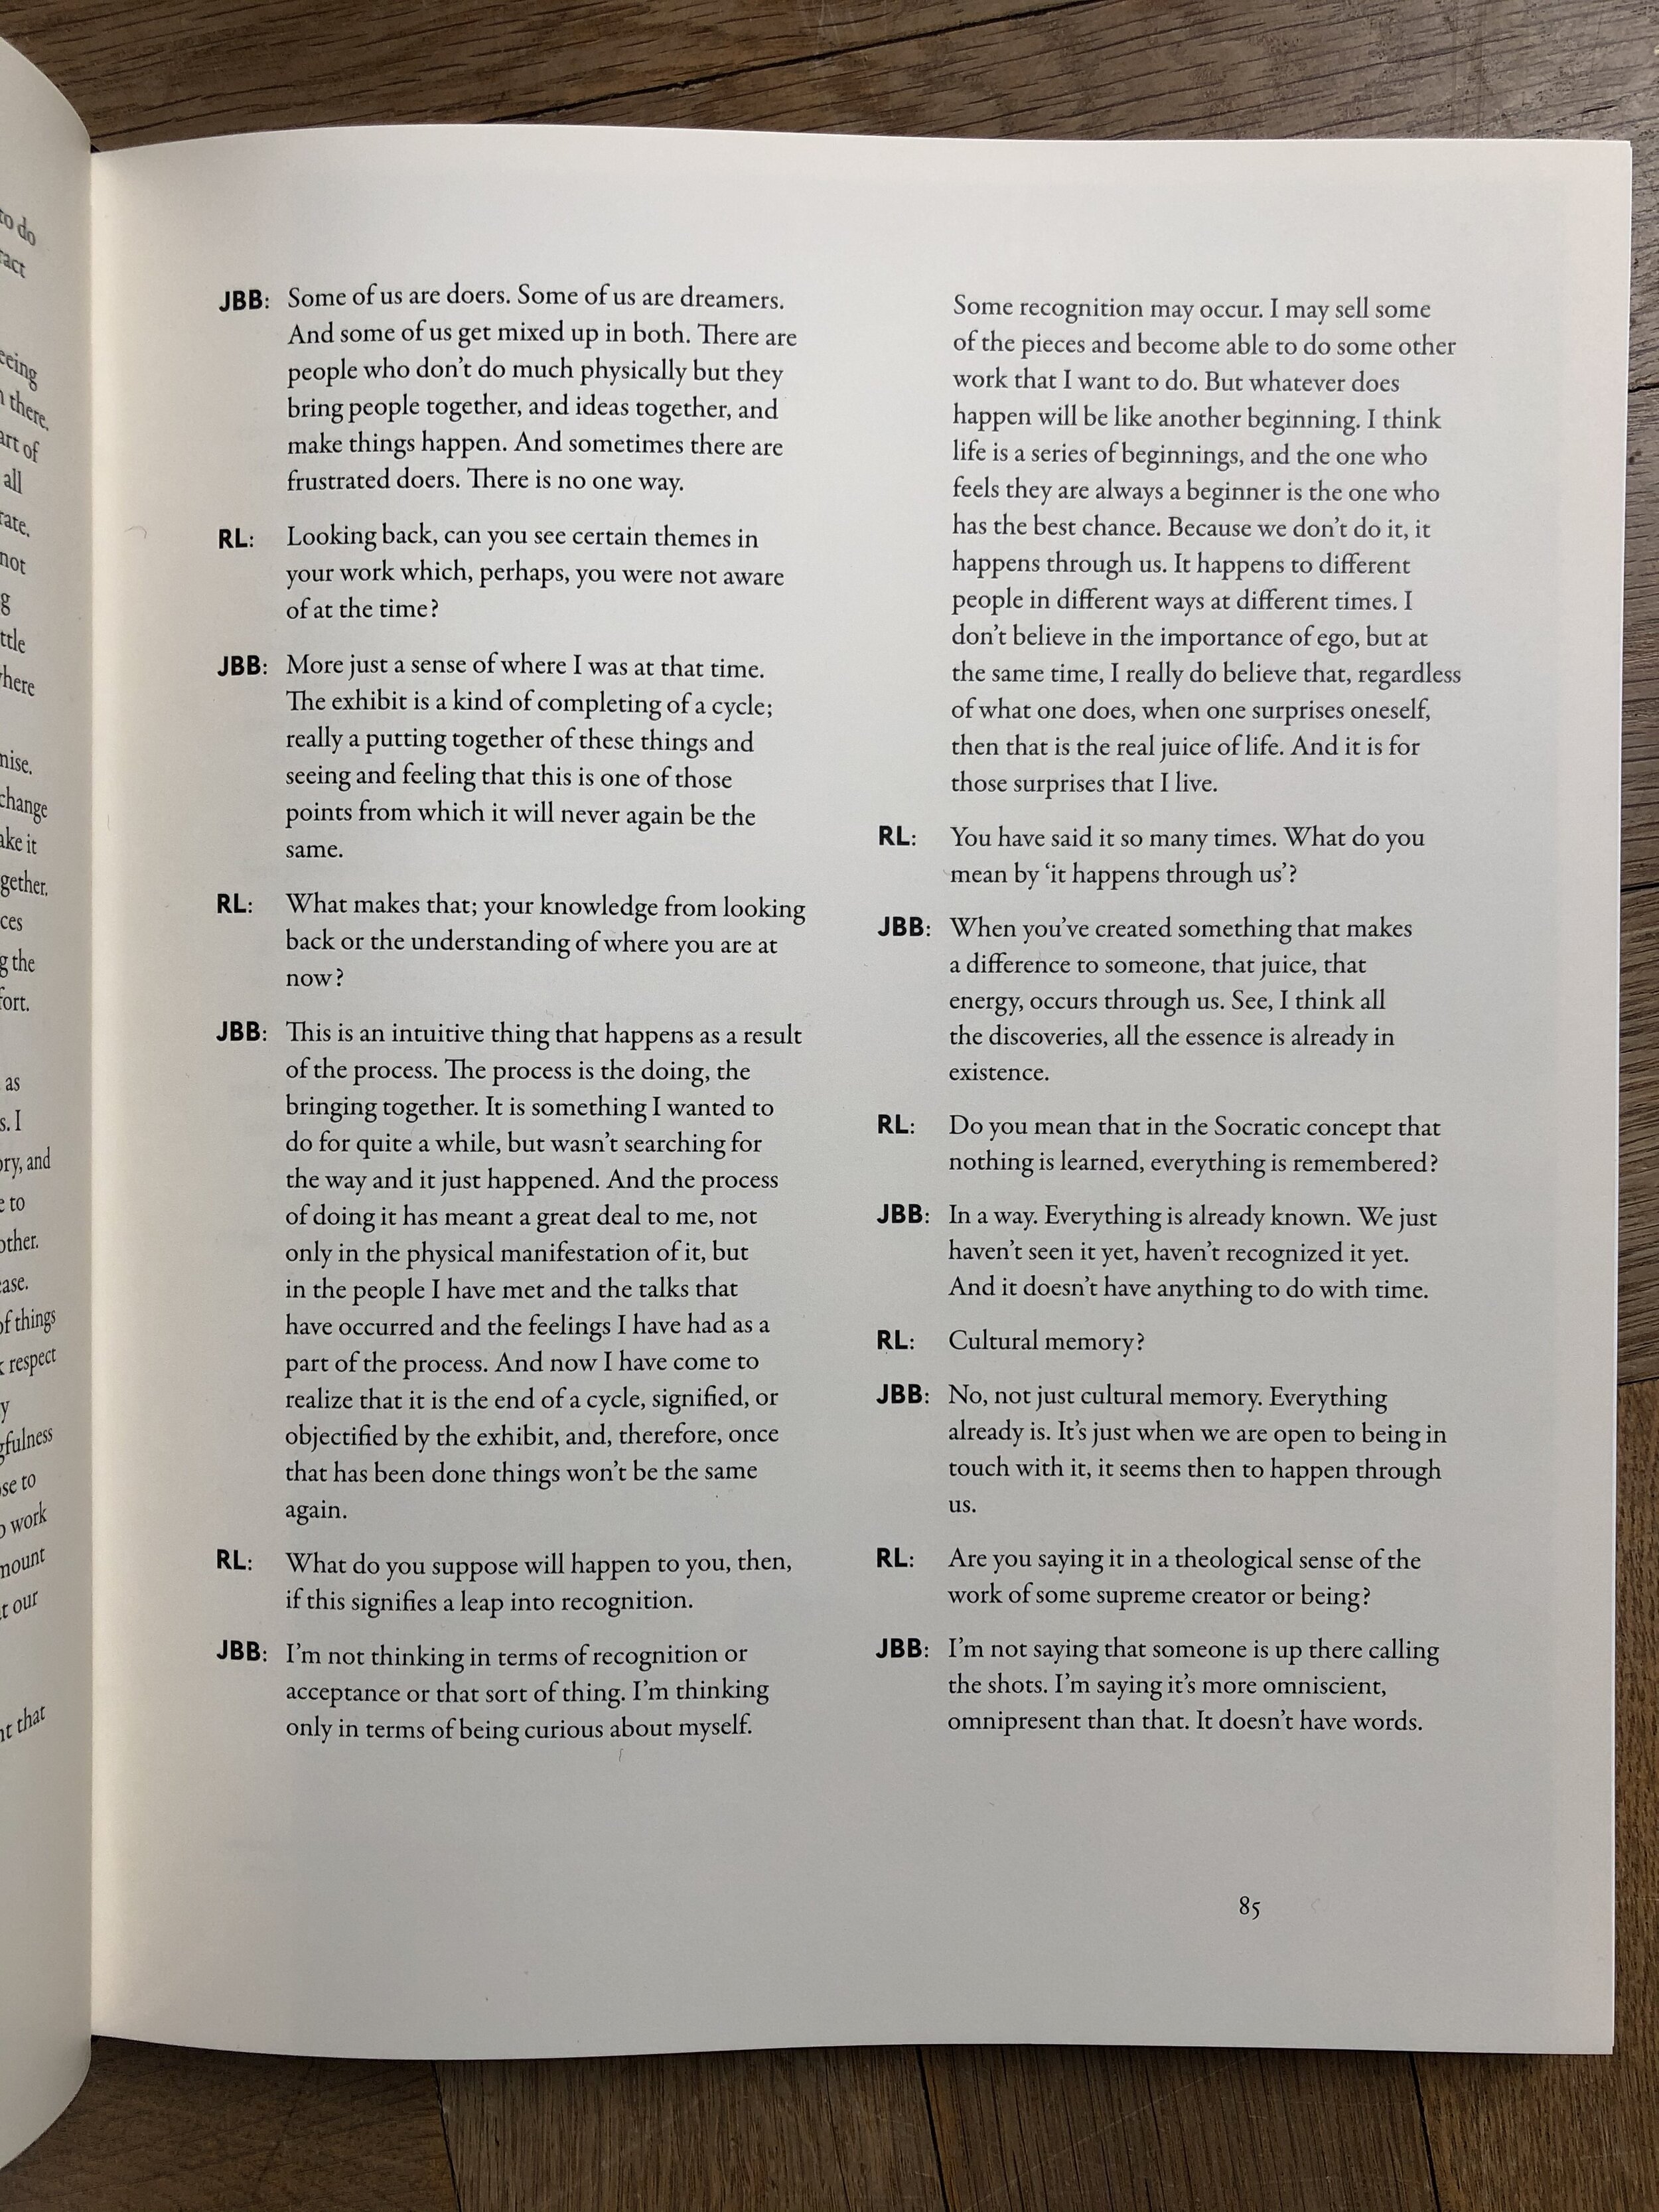 An Interview with JB Blunk by Rita Lawrence, 1978, from "JB Blunk," Edited by Mariah Nielson and Abake (Copy) (Copy)